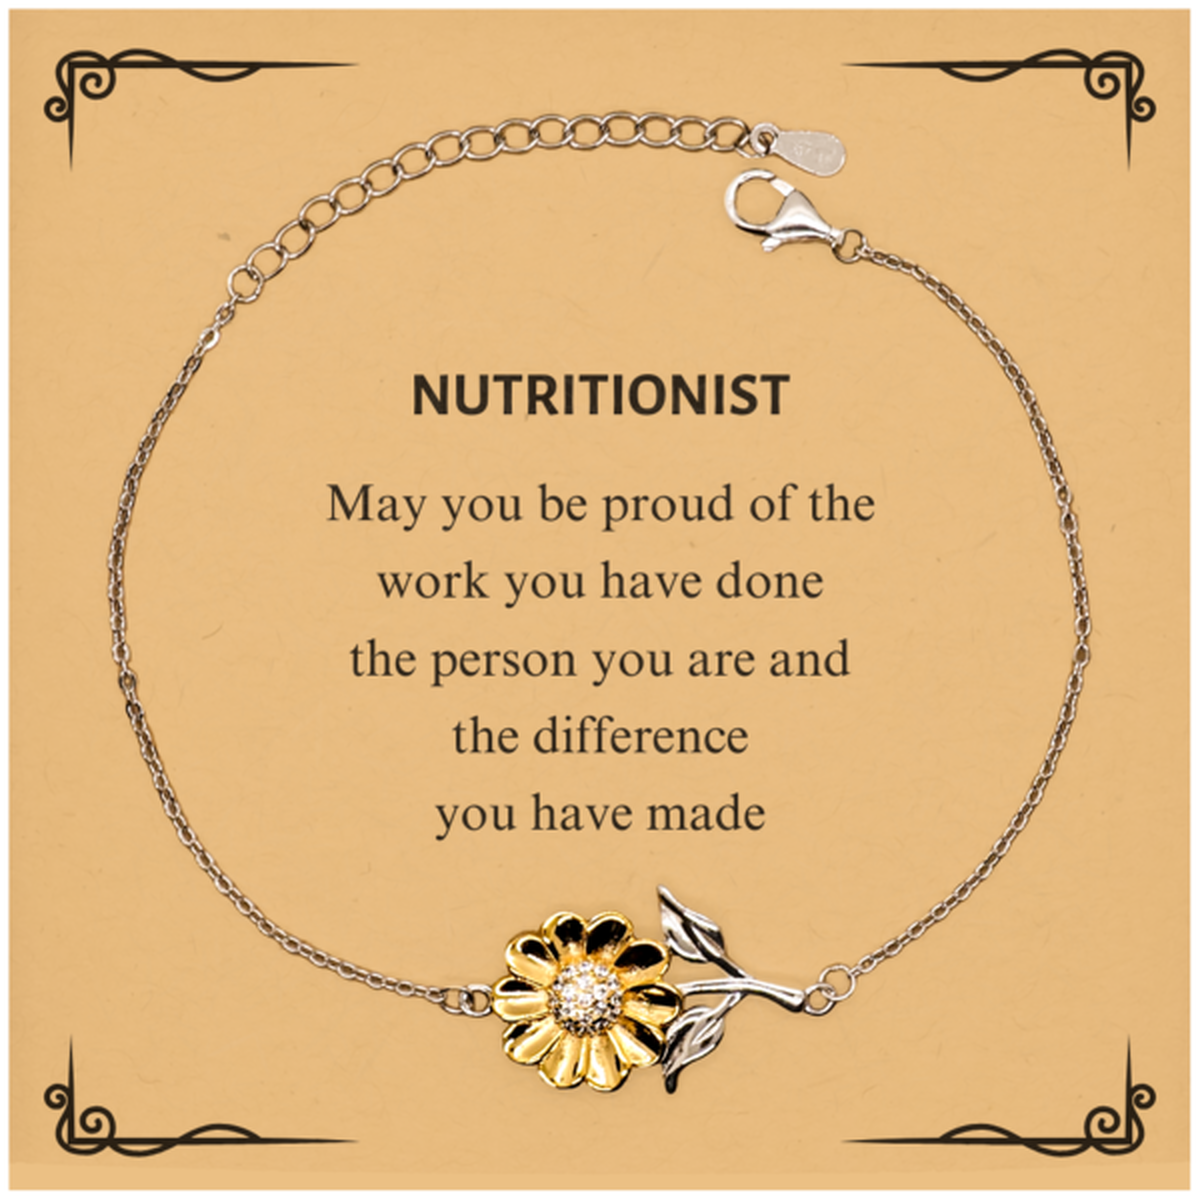 Nutritionist May you be proud of the work you have done, Retirement Nutritionist Sunflower Bracelet for Colleague Appreciation Gifts Amazing for Nutritionist